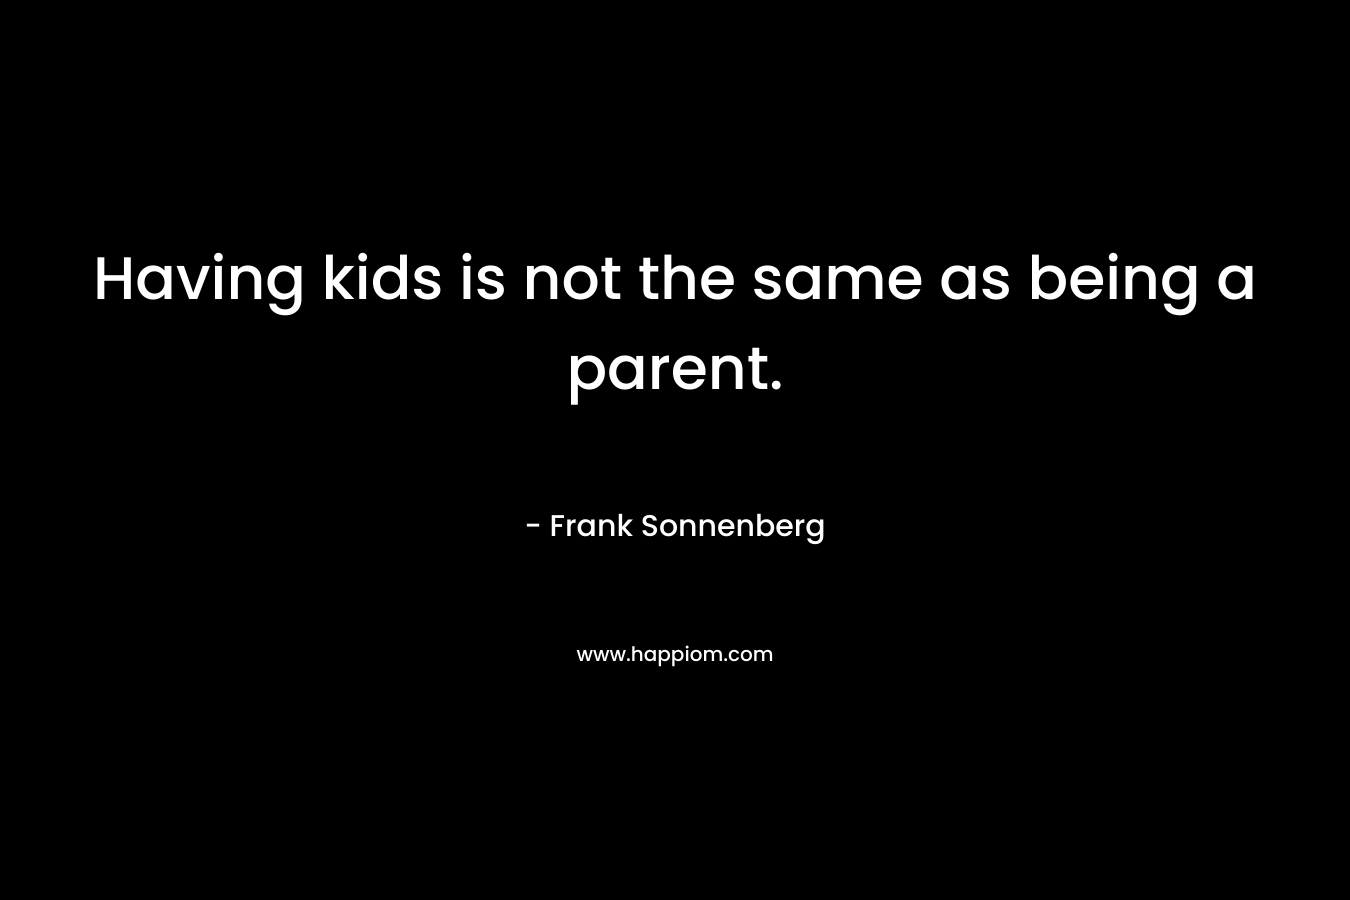 Having kids is not the same as being a parent.